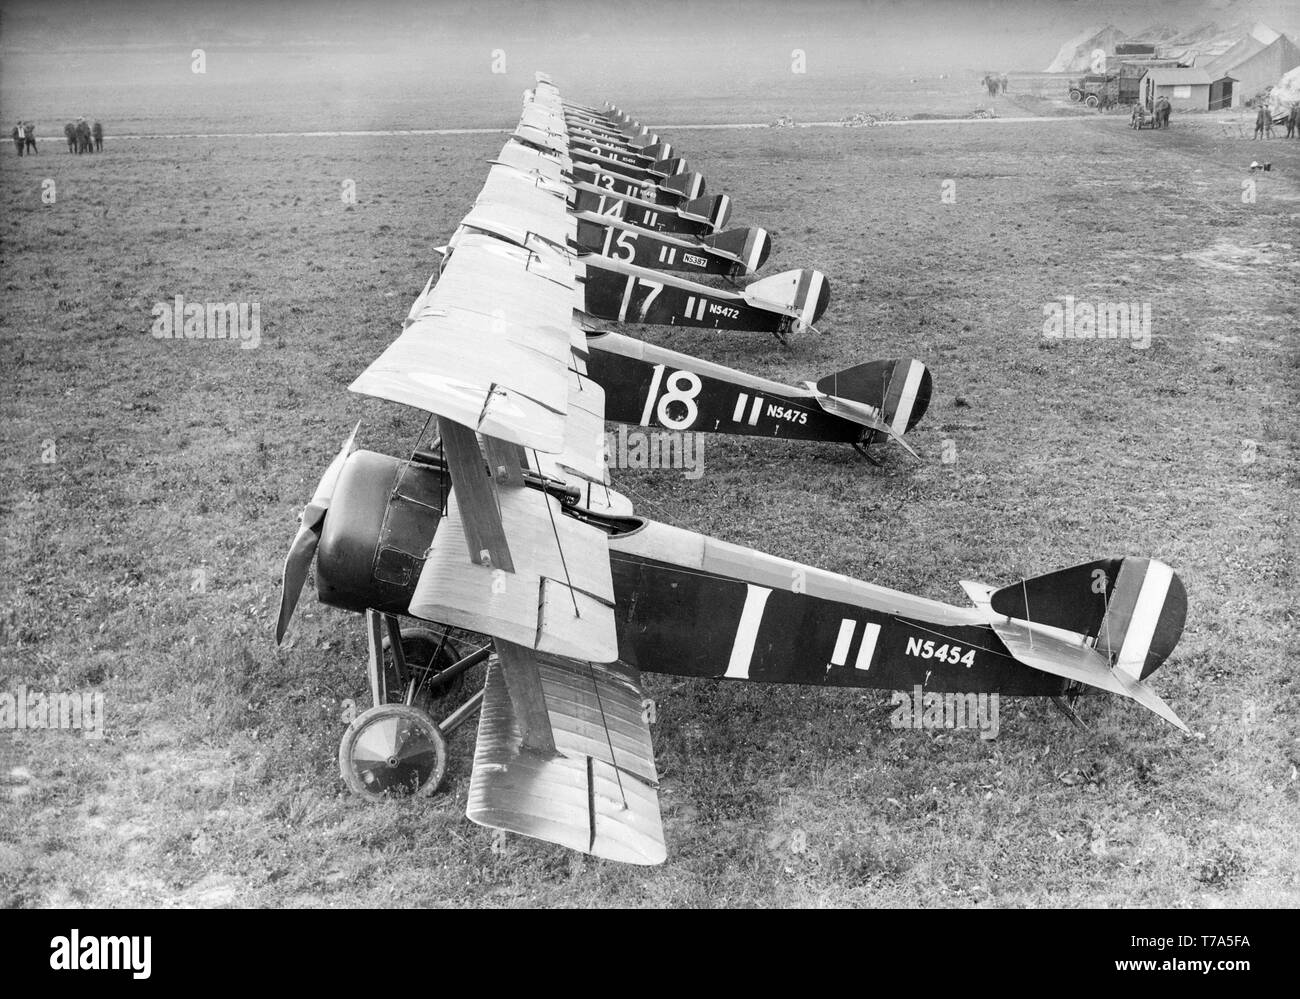 A line up of Sopwith Triplanes of the British Royal Air Force or Royal Flying Corps at an airfield during World War One. Serial numbers N5454 and N5475 nearest the camera. Stock Photo